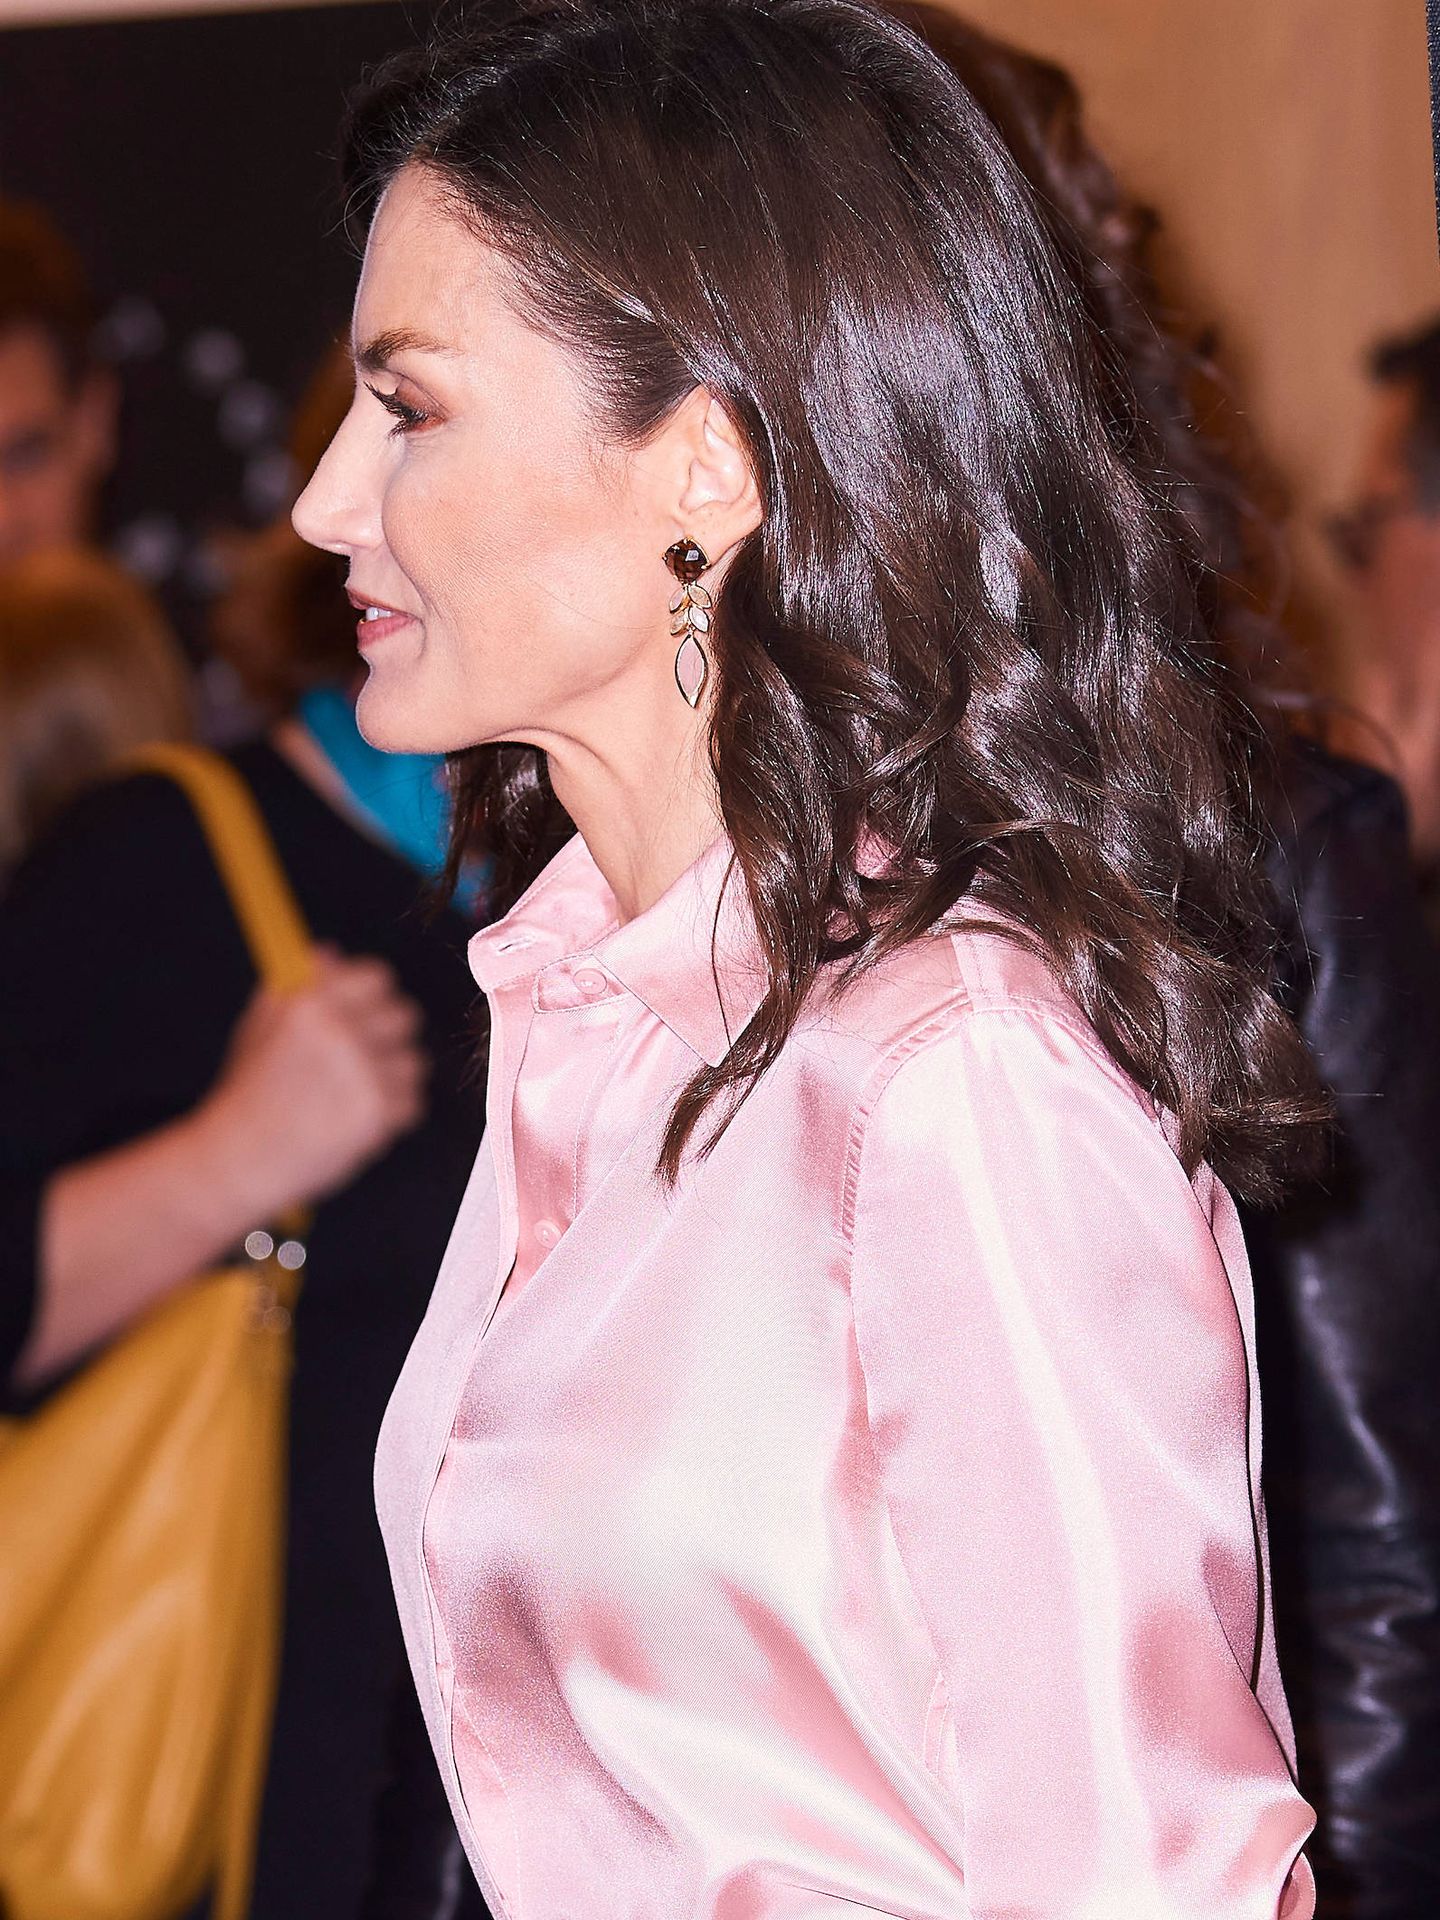 Queen Letizia of Spain attends he Rare Disease Day 2020 at BBVA Headquarters on March 5, 2020 in Madrid, Spain